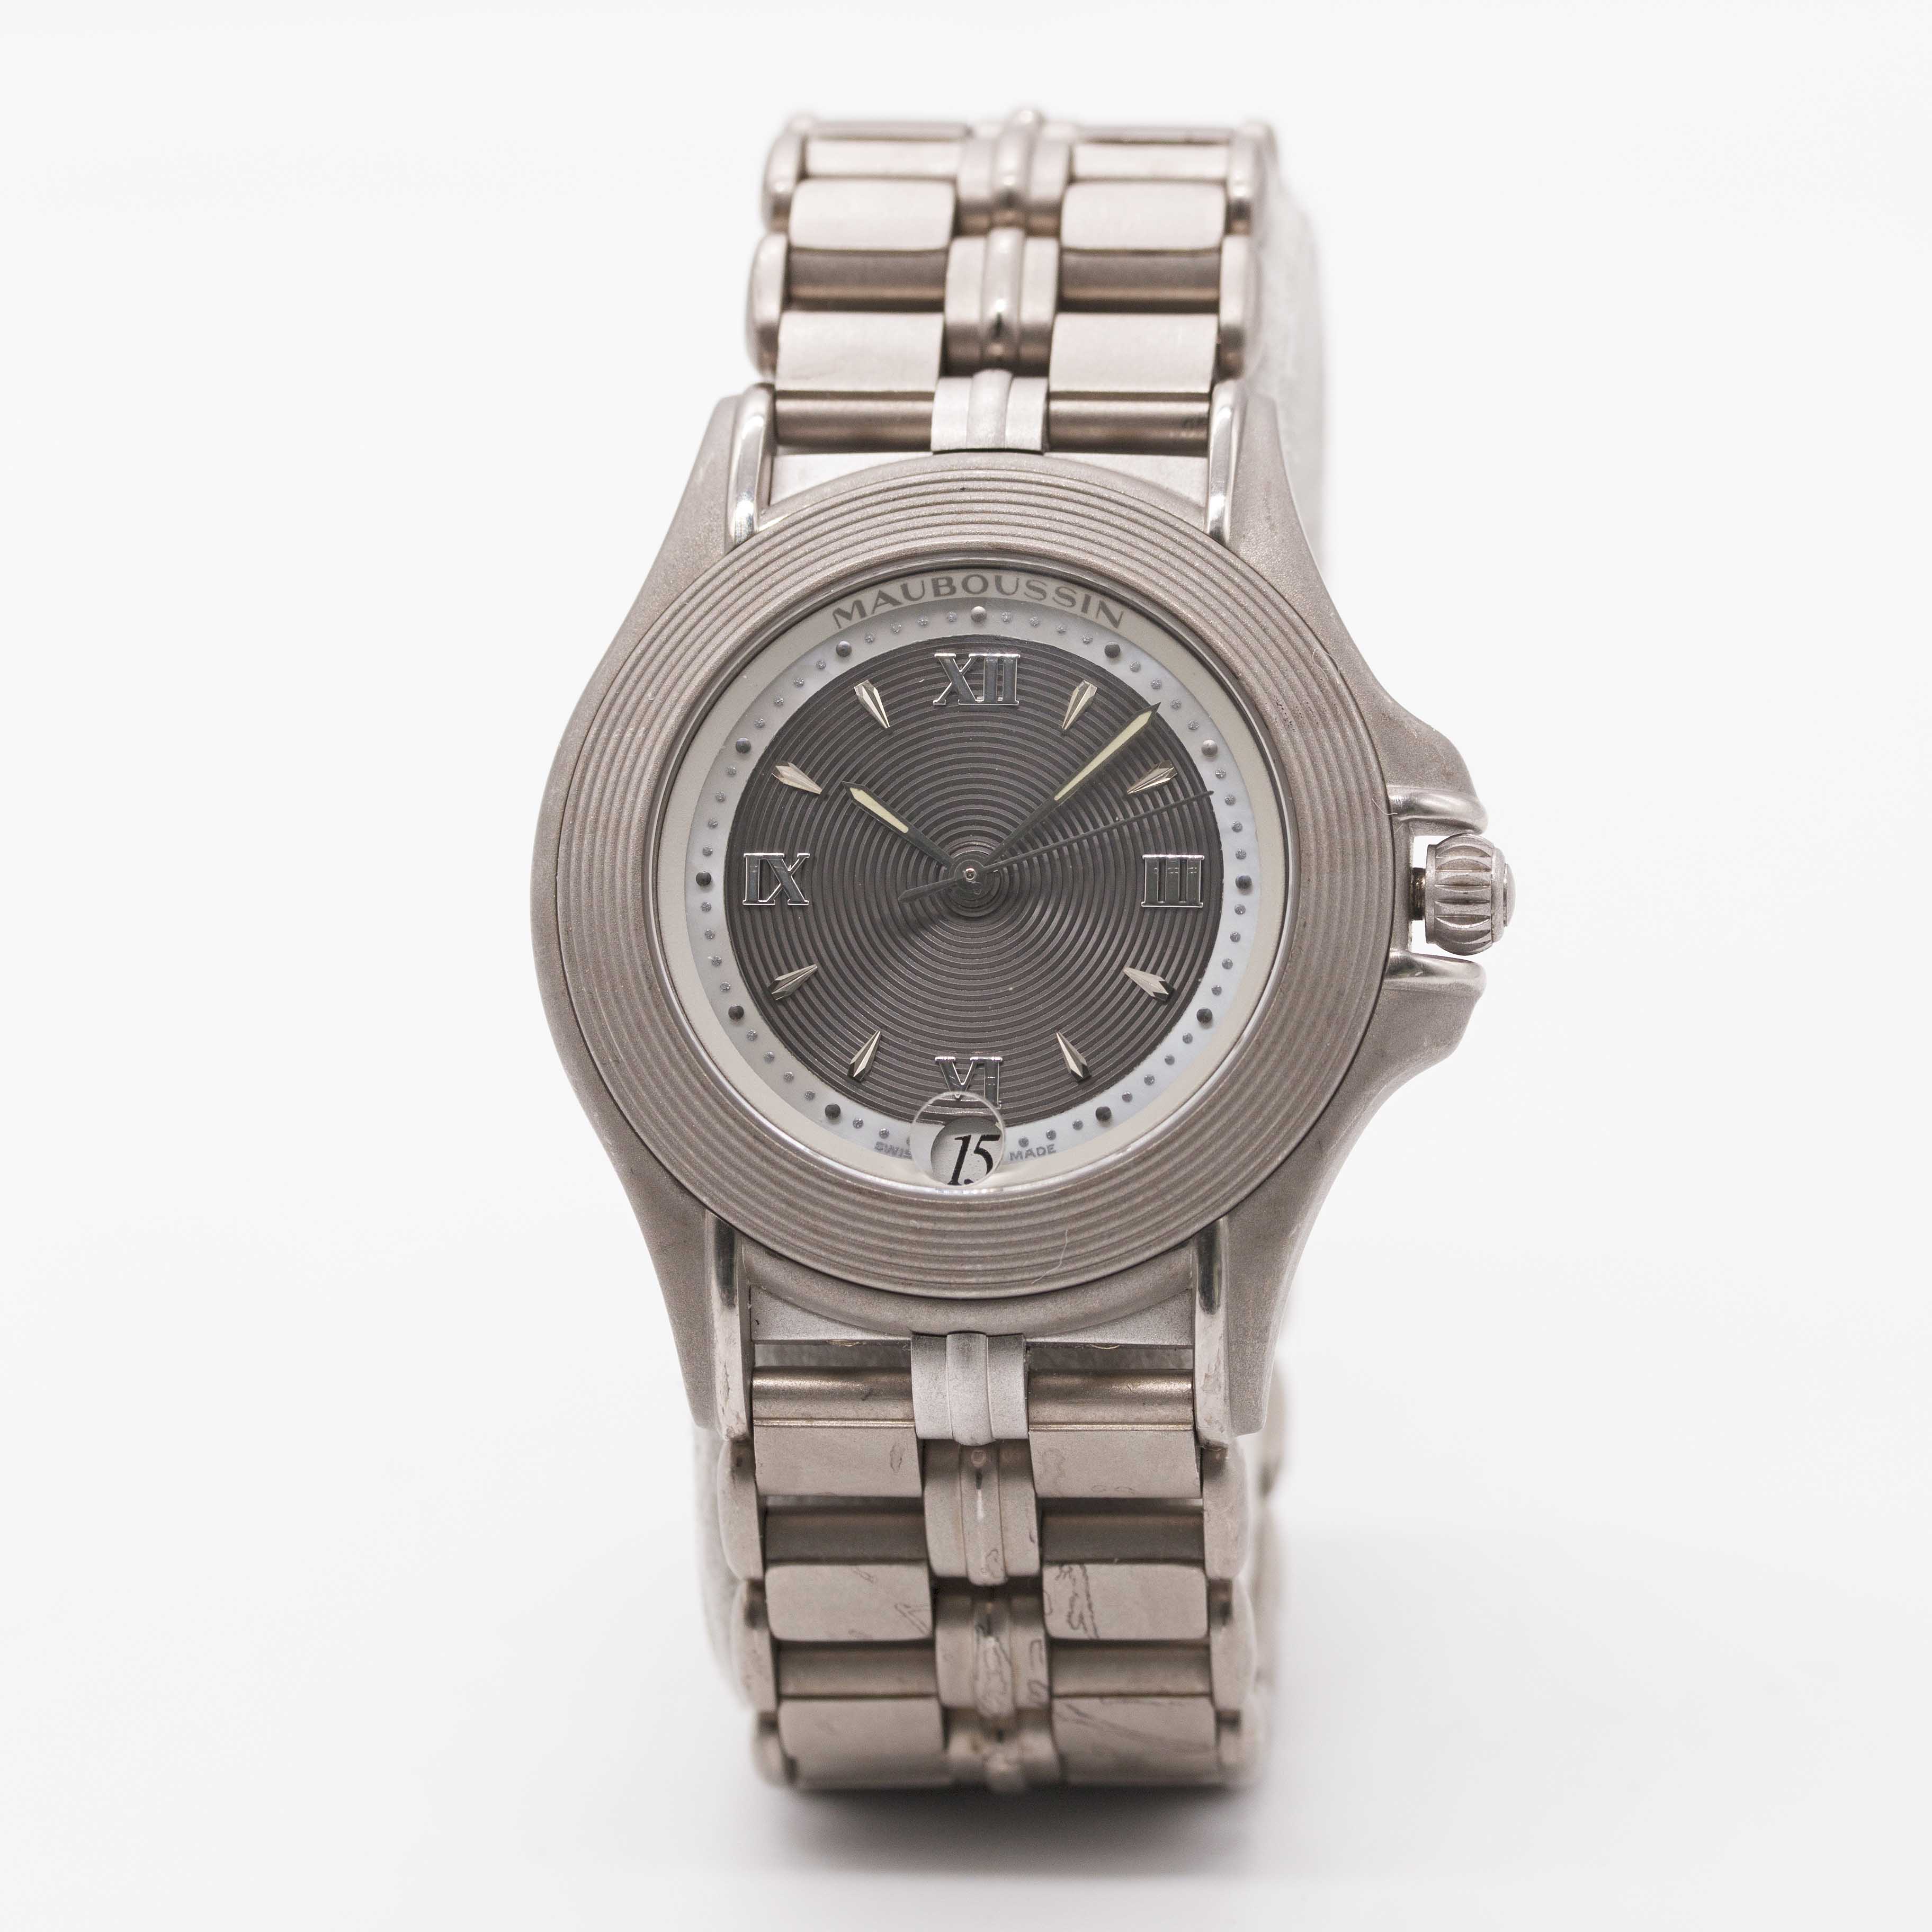 A GENTLEMAN'S SIZE 18K SOLID WHITE GOLD MAUBOUSSIN AUTOMATIC BRACELET WATCH CIRCA 1990s, REF. R02368 - Image 2 of 8